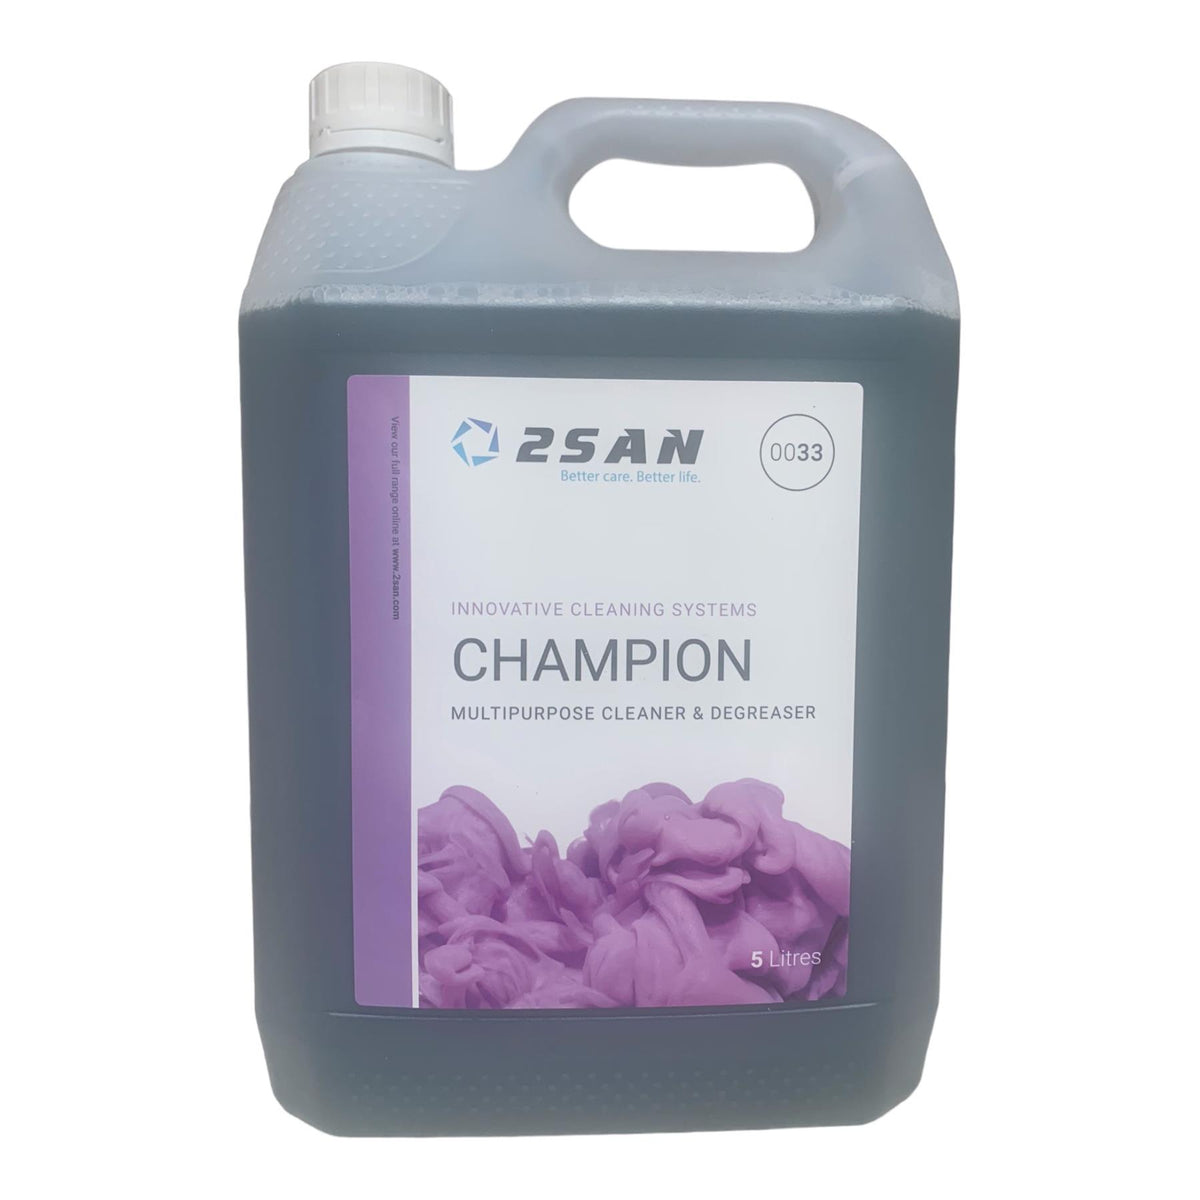 2SAN Champion Multipurpose Cleaner and Degreaser 5 Litres